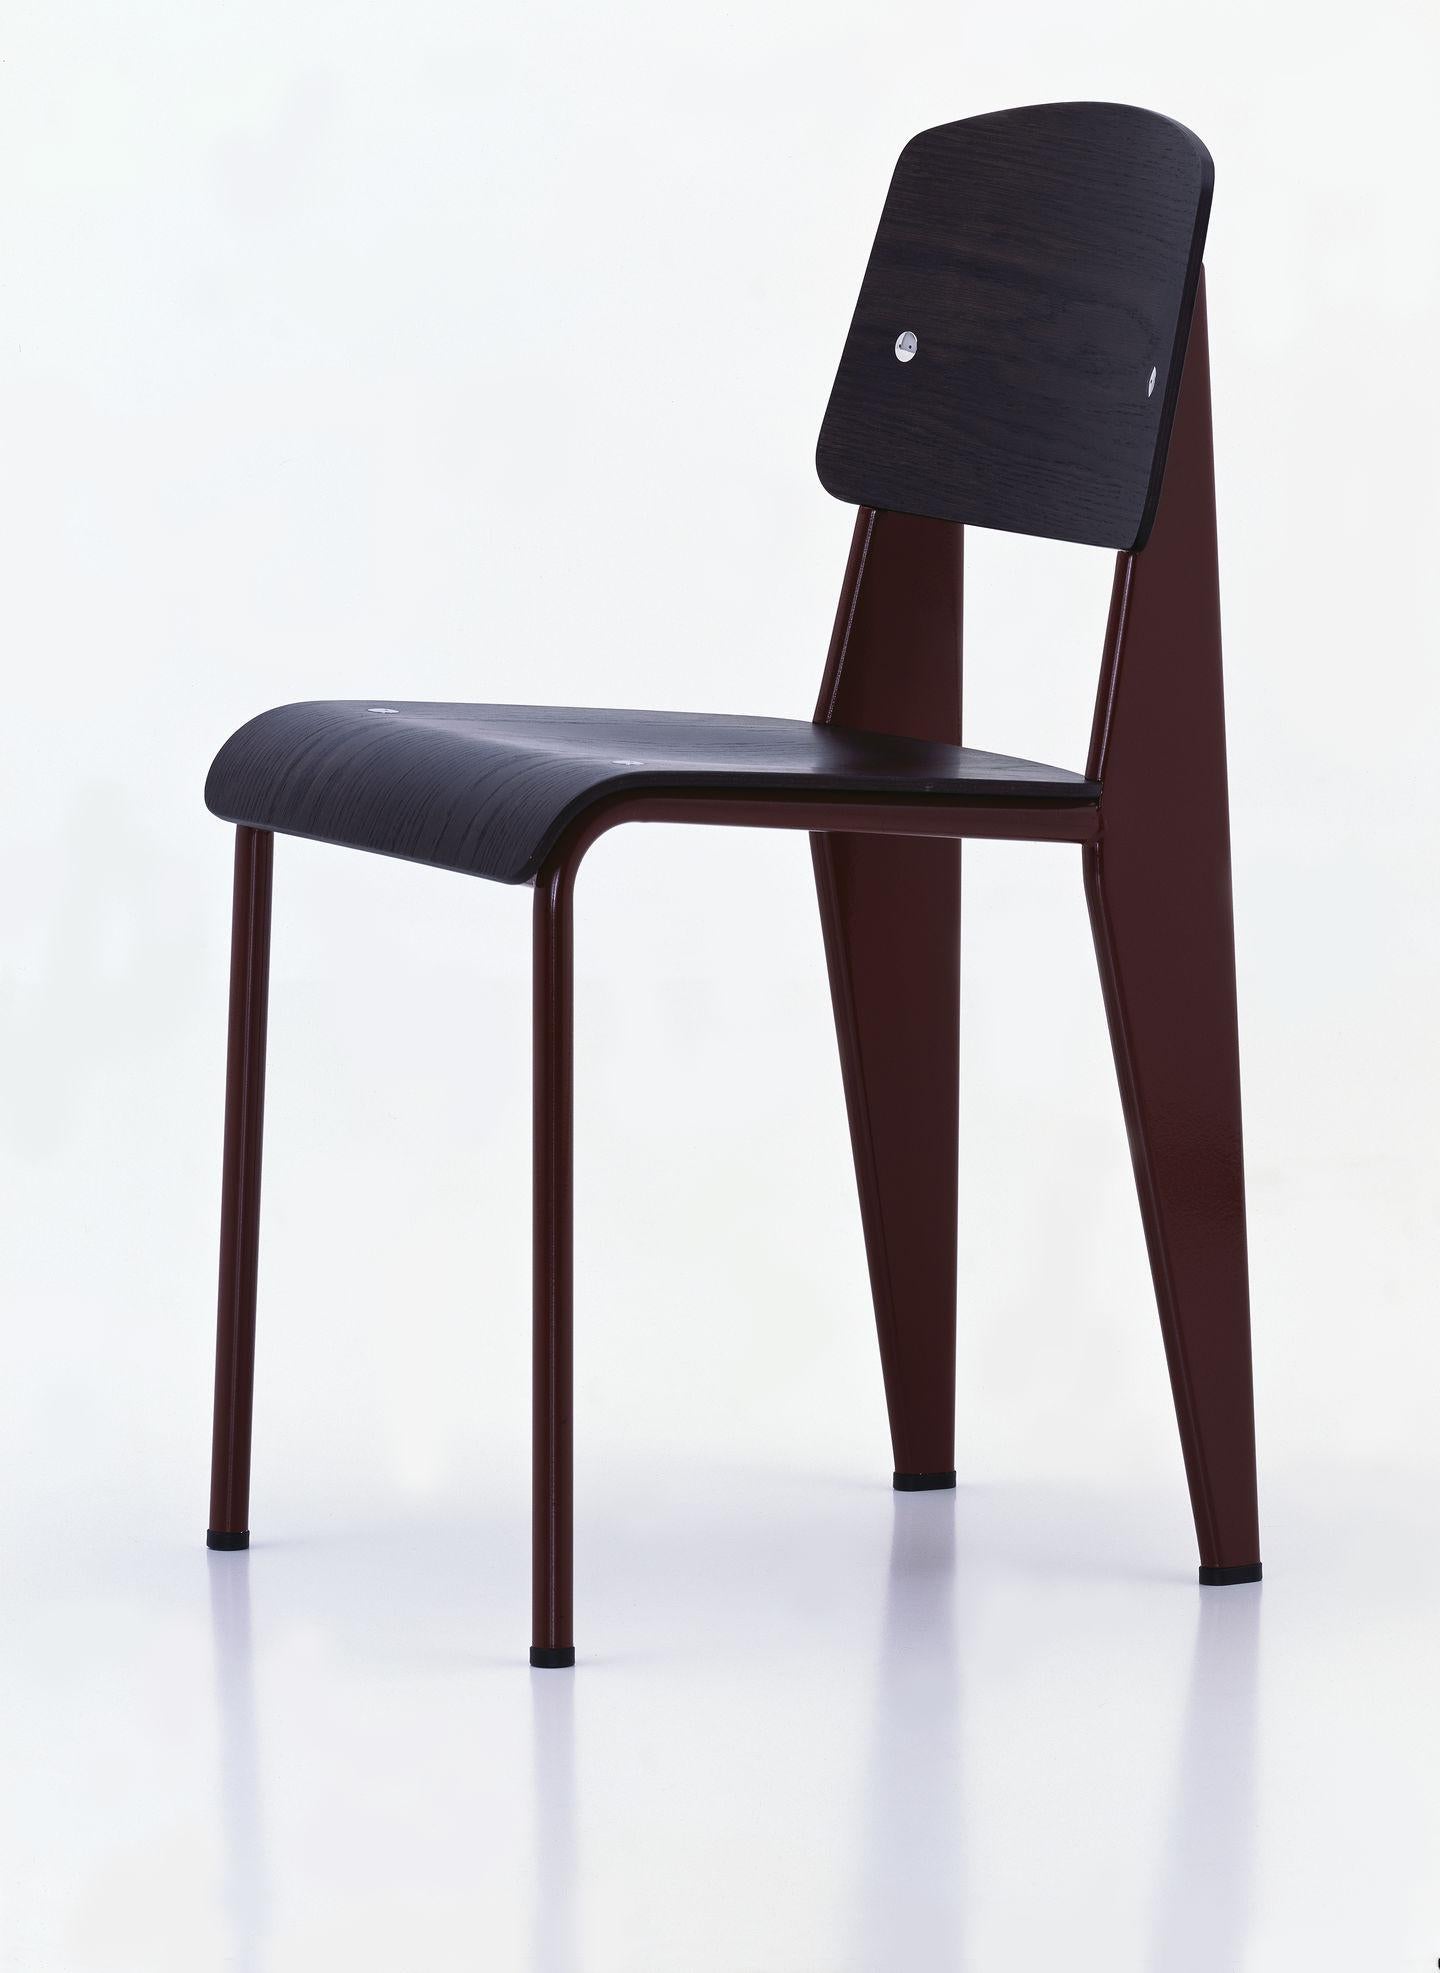 Chair designed by Jean Prouvé in 1934/50.
Manufactured by Vitra, Switzerland.

The Standard chair by Jean Prouvé has evolved into one of the most famous classics of the French 'constructeur'. The seat and backrest of this understated, iconic